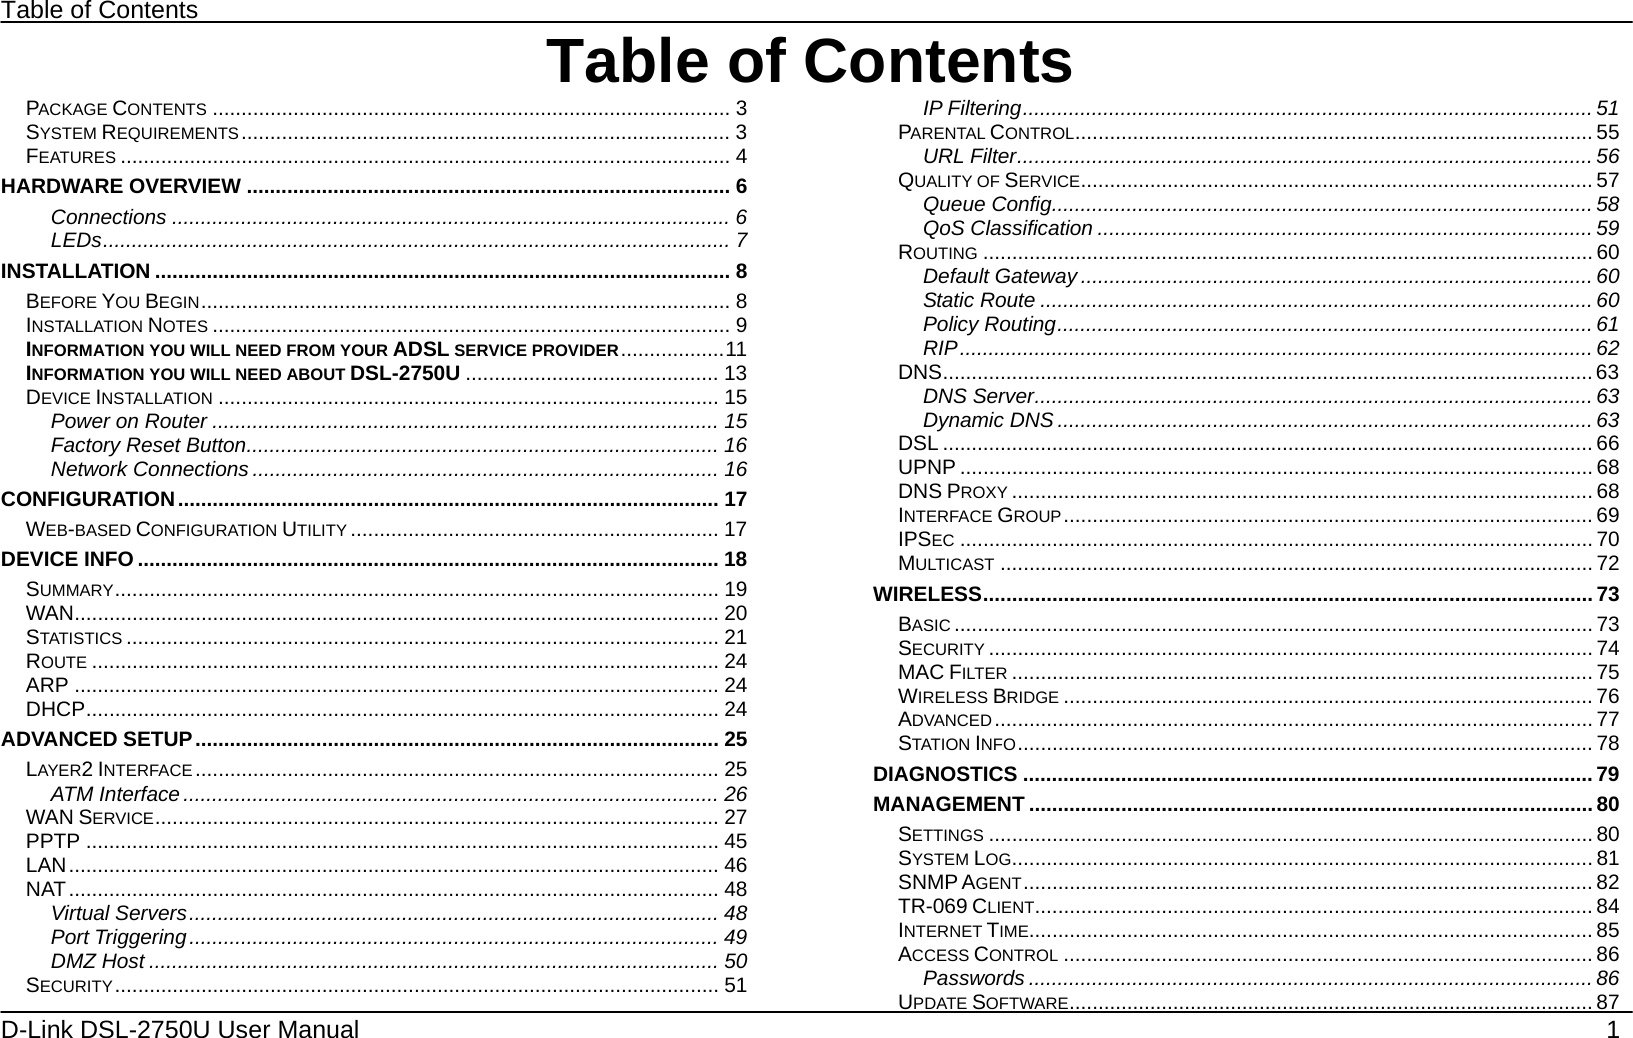 Table of Contents D-Link DSL-2750U User Manual    1 Table of ContentsPACKAGE CONTENTS .......................................................................................... 3 SYSTEM REQUIREMENTS..................................................................................... 3 FEATURES .......................................................................................................... 4 HARDWARE OVERVIEW .................................................................................... 6 Connections ................................................................................................. 6 LEDs............................................................................................................. 7 INSTALLATION .................................................................................................... 8 BEFORE YOU BEGIN............................................................................................ 8 INSTALLATION NOTES .......................................................................................... 9 INFORMATION YOU WILL NEED FROM YOUR ADSL SERVICE PROVIDER..................11 INFORMATION YOU WILL NEED ABOUT DSL-2750U ............................................ 13 DEVICE INSTALLATION ....................................................................................... 15 Power on Router ........................................................................................ 15 Factory Reset Button.................................................................................. 16 Network Connections ................................................................................. 16 CONFIGURATION.............................................................................................. 17 WEB-BASED CONFIGURATION UTILITY ................................................................ 17 DEVICE INFO ..................................................................................................... 18 SUMMARY......................................................................................................... 19 WAN................................................................................................................ 20 STATISTICS ....................................................................................................... 21 ROUTE ............................................................................................................. 24 ARP ................................................................................................................ 24 DHCP.............................................................................................................. 24 ADVANCED SETUP........................................................................................... 25 LAYER2 INTERFACE........................................................................................... 25 ATM Interface ............................................................................................. 26 WAN SERVICE.................................................................................................. 27 PPTP .............................................................................................................. 45 LAN................................................................................................................. 46 NAT................................................................................................................. 48 Virtual Servers............................................................................................ 48 Port Triggering............................................................................................ 49 DMZ Host ................................................................................................... 50 SECURITY......................................................................................................... 51 IP Filtering................................................................................................... 51 PARENTAL CONTROL.......................................................................................... 55 URL Filter.................................................................................................... 56 QUALITY OF SERVICE......................................................................................... 57 Queue Config.............................................................................................. 58 QoS Classification ...................................................................................... 59 ROUTING .......................................................................................................... 60 Default Gateway ......................................................................................... 60 Static Route ................................................................................................ 60 Policy Routing............................................................................................. 61 RIP.............................................................................................................. 62 DNS................................................................................................................. 63 DNS Server................................................................................................. 63 Dynamic DNS ............................................................................................. 63 DSL ................................................................................................................. 66 UPNP .............................................................................................................. 68 DNS PROXY ..................................................................................................... 68 INTERFACE GROUP............................................................................................ 69 IPSEC .............................................................................................................. 70 MULTICAST ....................................................................................................... 72 WIRELESS.......................................................................................................... 73 BASIC ............................................................................................................... 73 SECURITY ......................................................................................................... 74 MAC FILTER ..................................................................................................... 75 WIRELESS BRIDGE ............................................................................................ 76 ADVANCED ........................................................................................................ 77 STATION INFO.................................................................................................... 78 DIAGNOSTICS ................................................................................................... 79 MANAGEMENT .................................................................................................. 80 SETTINGS ......................................................................................................... 80 SYSTEM LOG..................................................................................................... 81 SNMP AGENT................................................................................................... 82 TR-069 CLIENT................................................................................................. 84 INTERNET TIME.................................................................................................. 85 ACCESS CONTROL ............................................................................................ 86 Passwords .................................................................................................. 86 UPDATE SOFTWARE........................................................................................... 87 